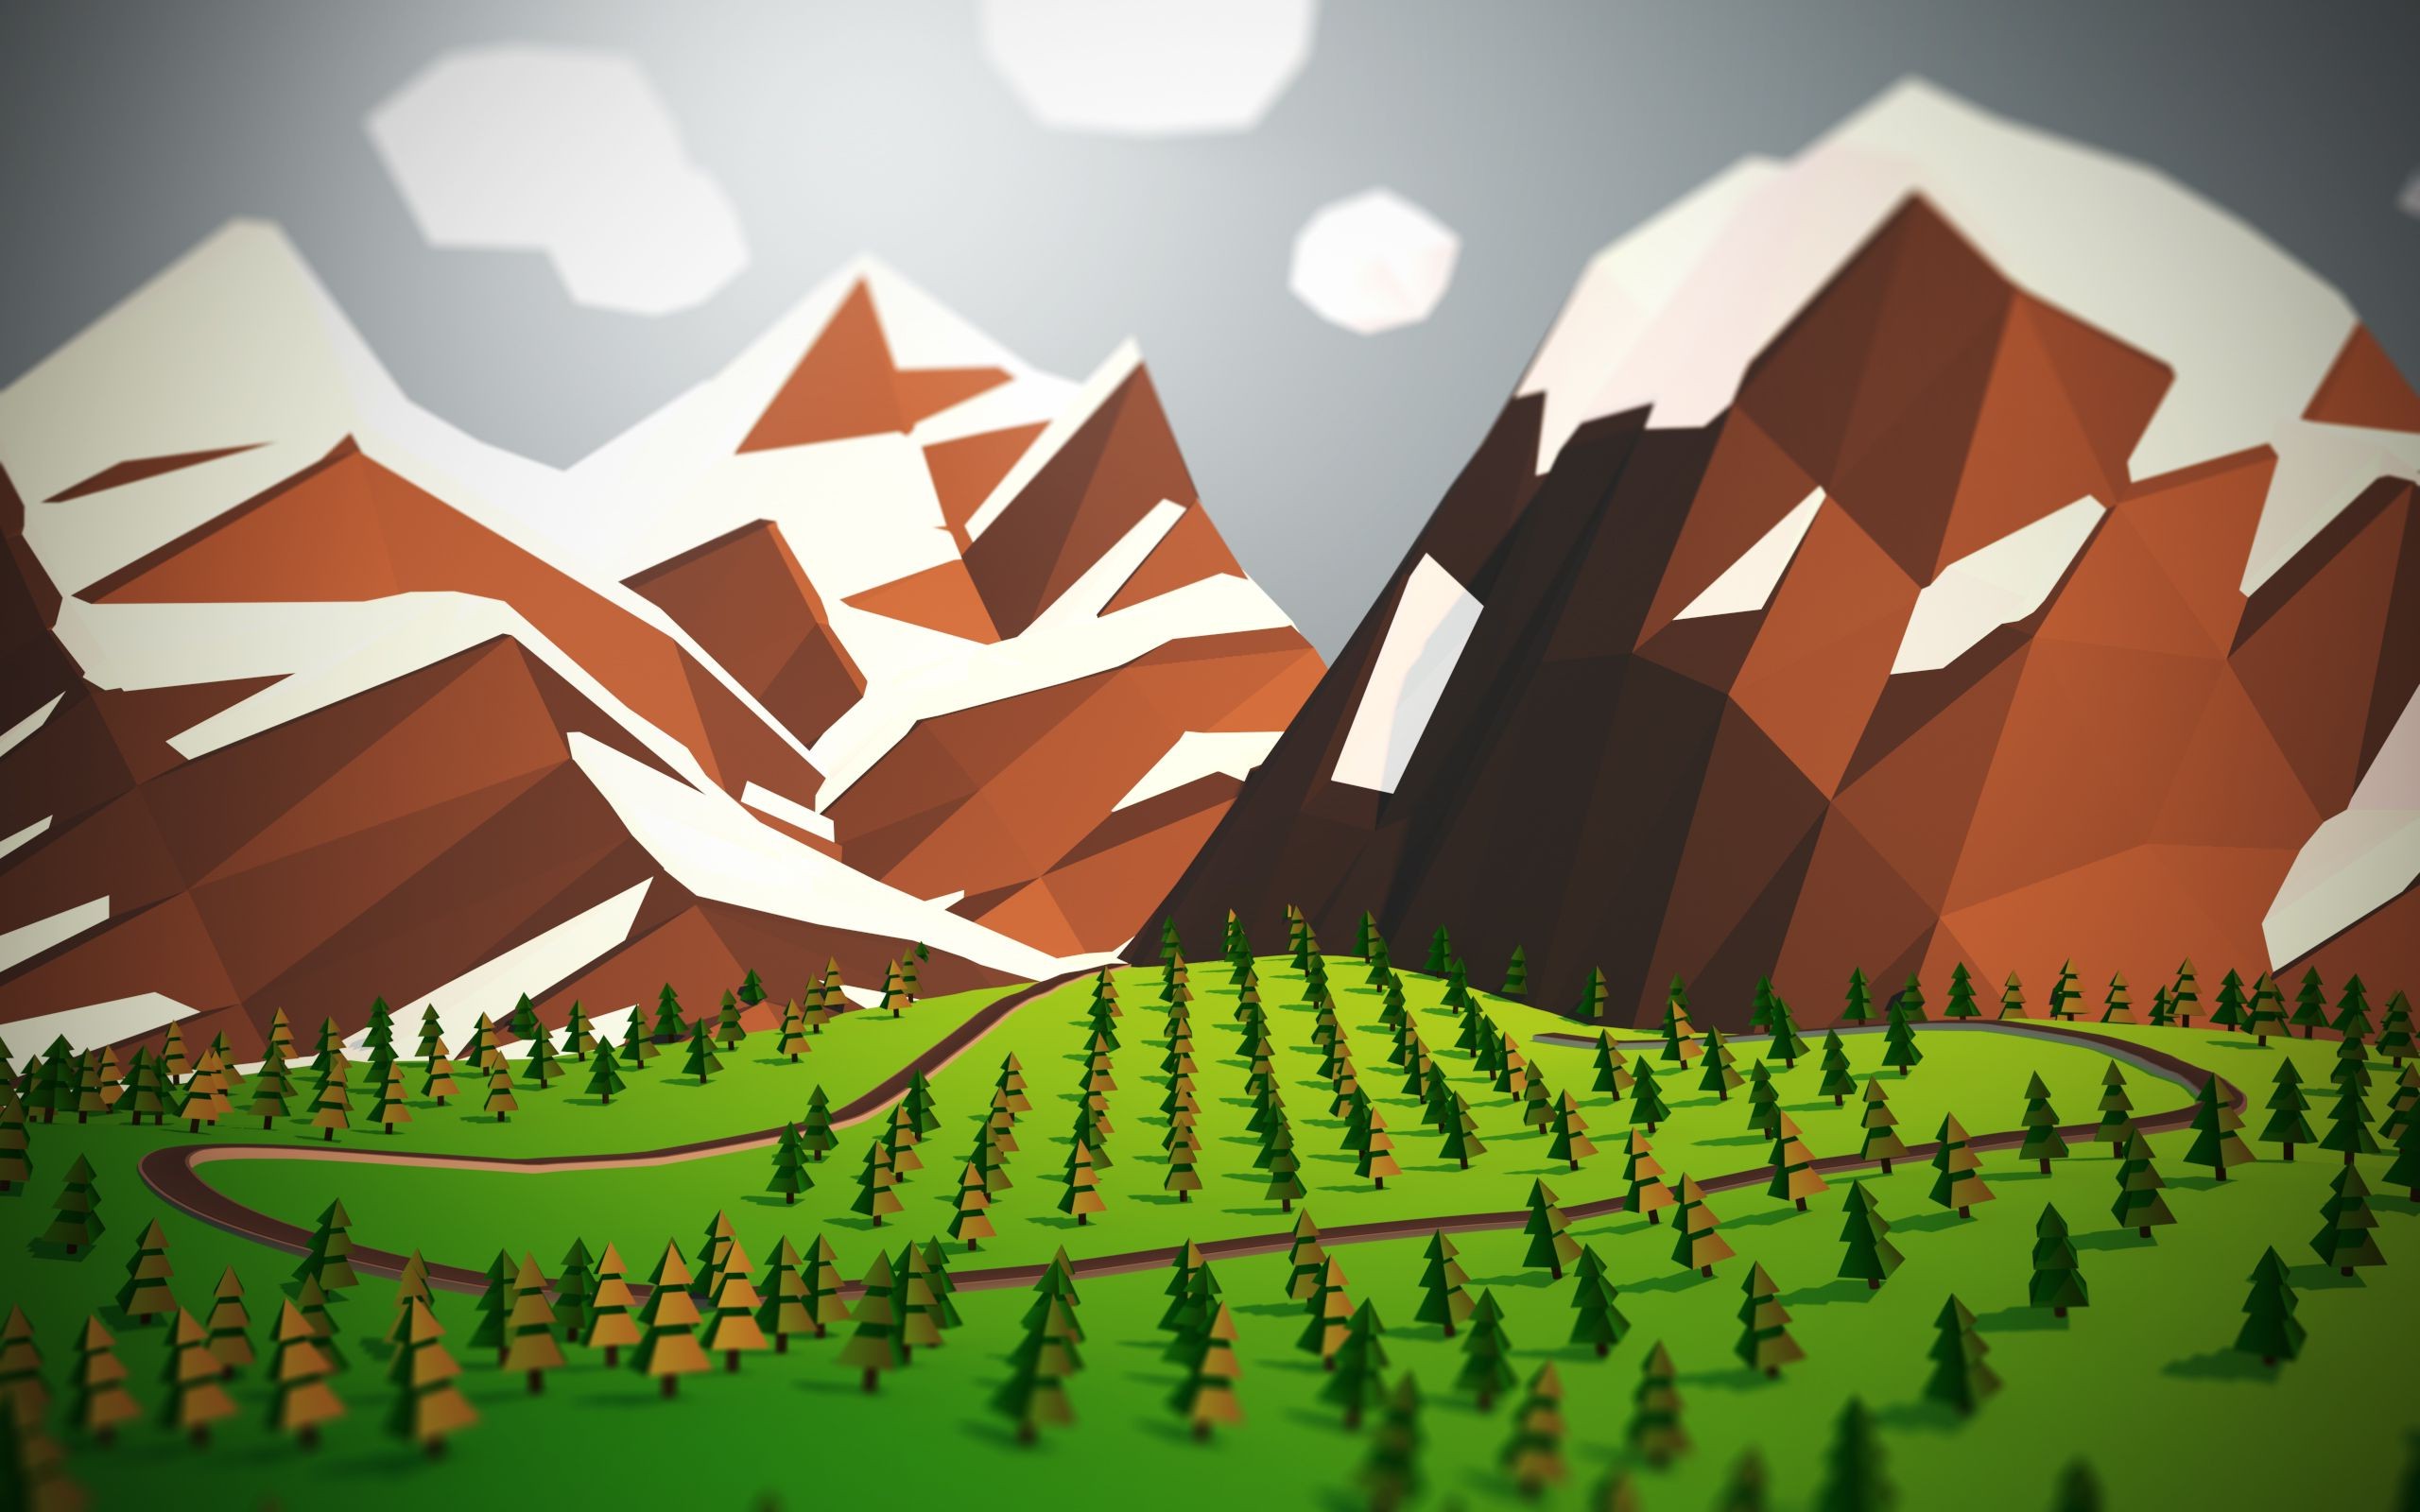 Low Poly Mountain Wallpapers